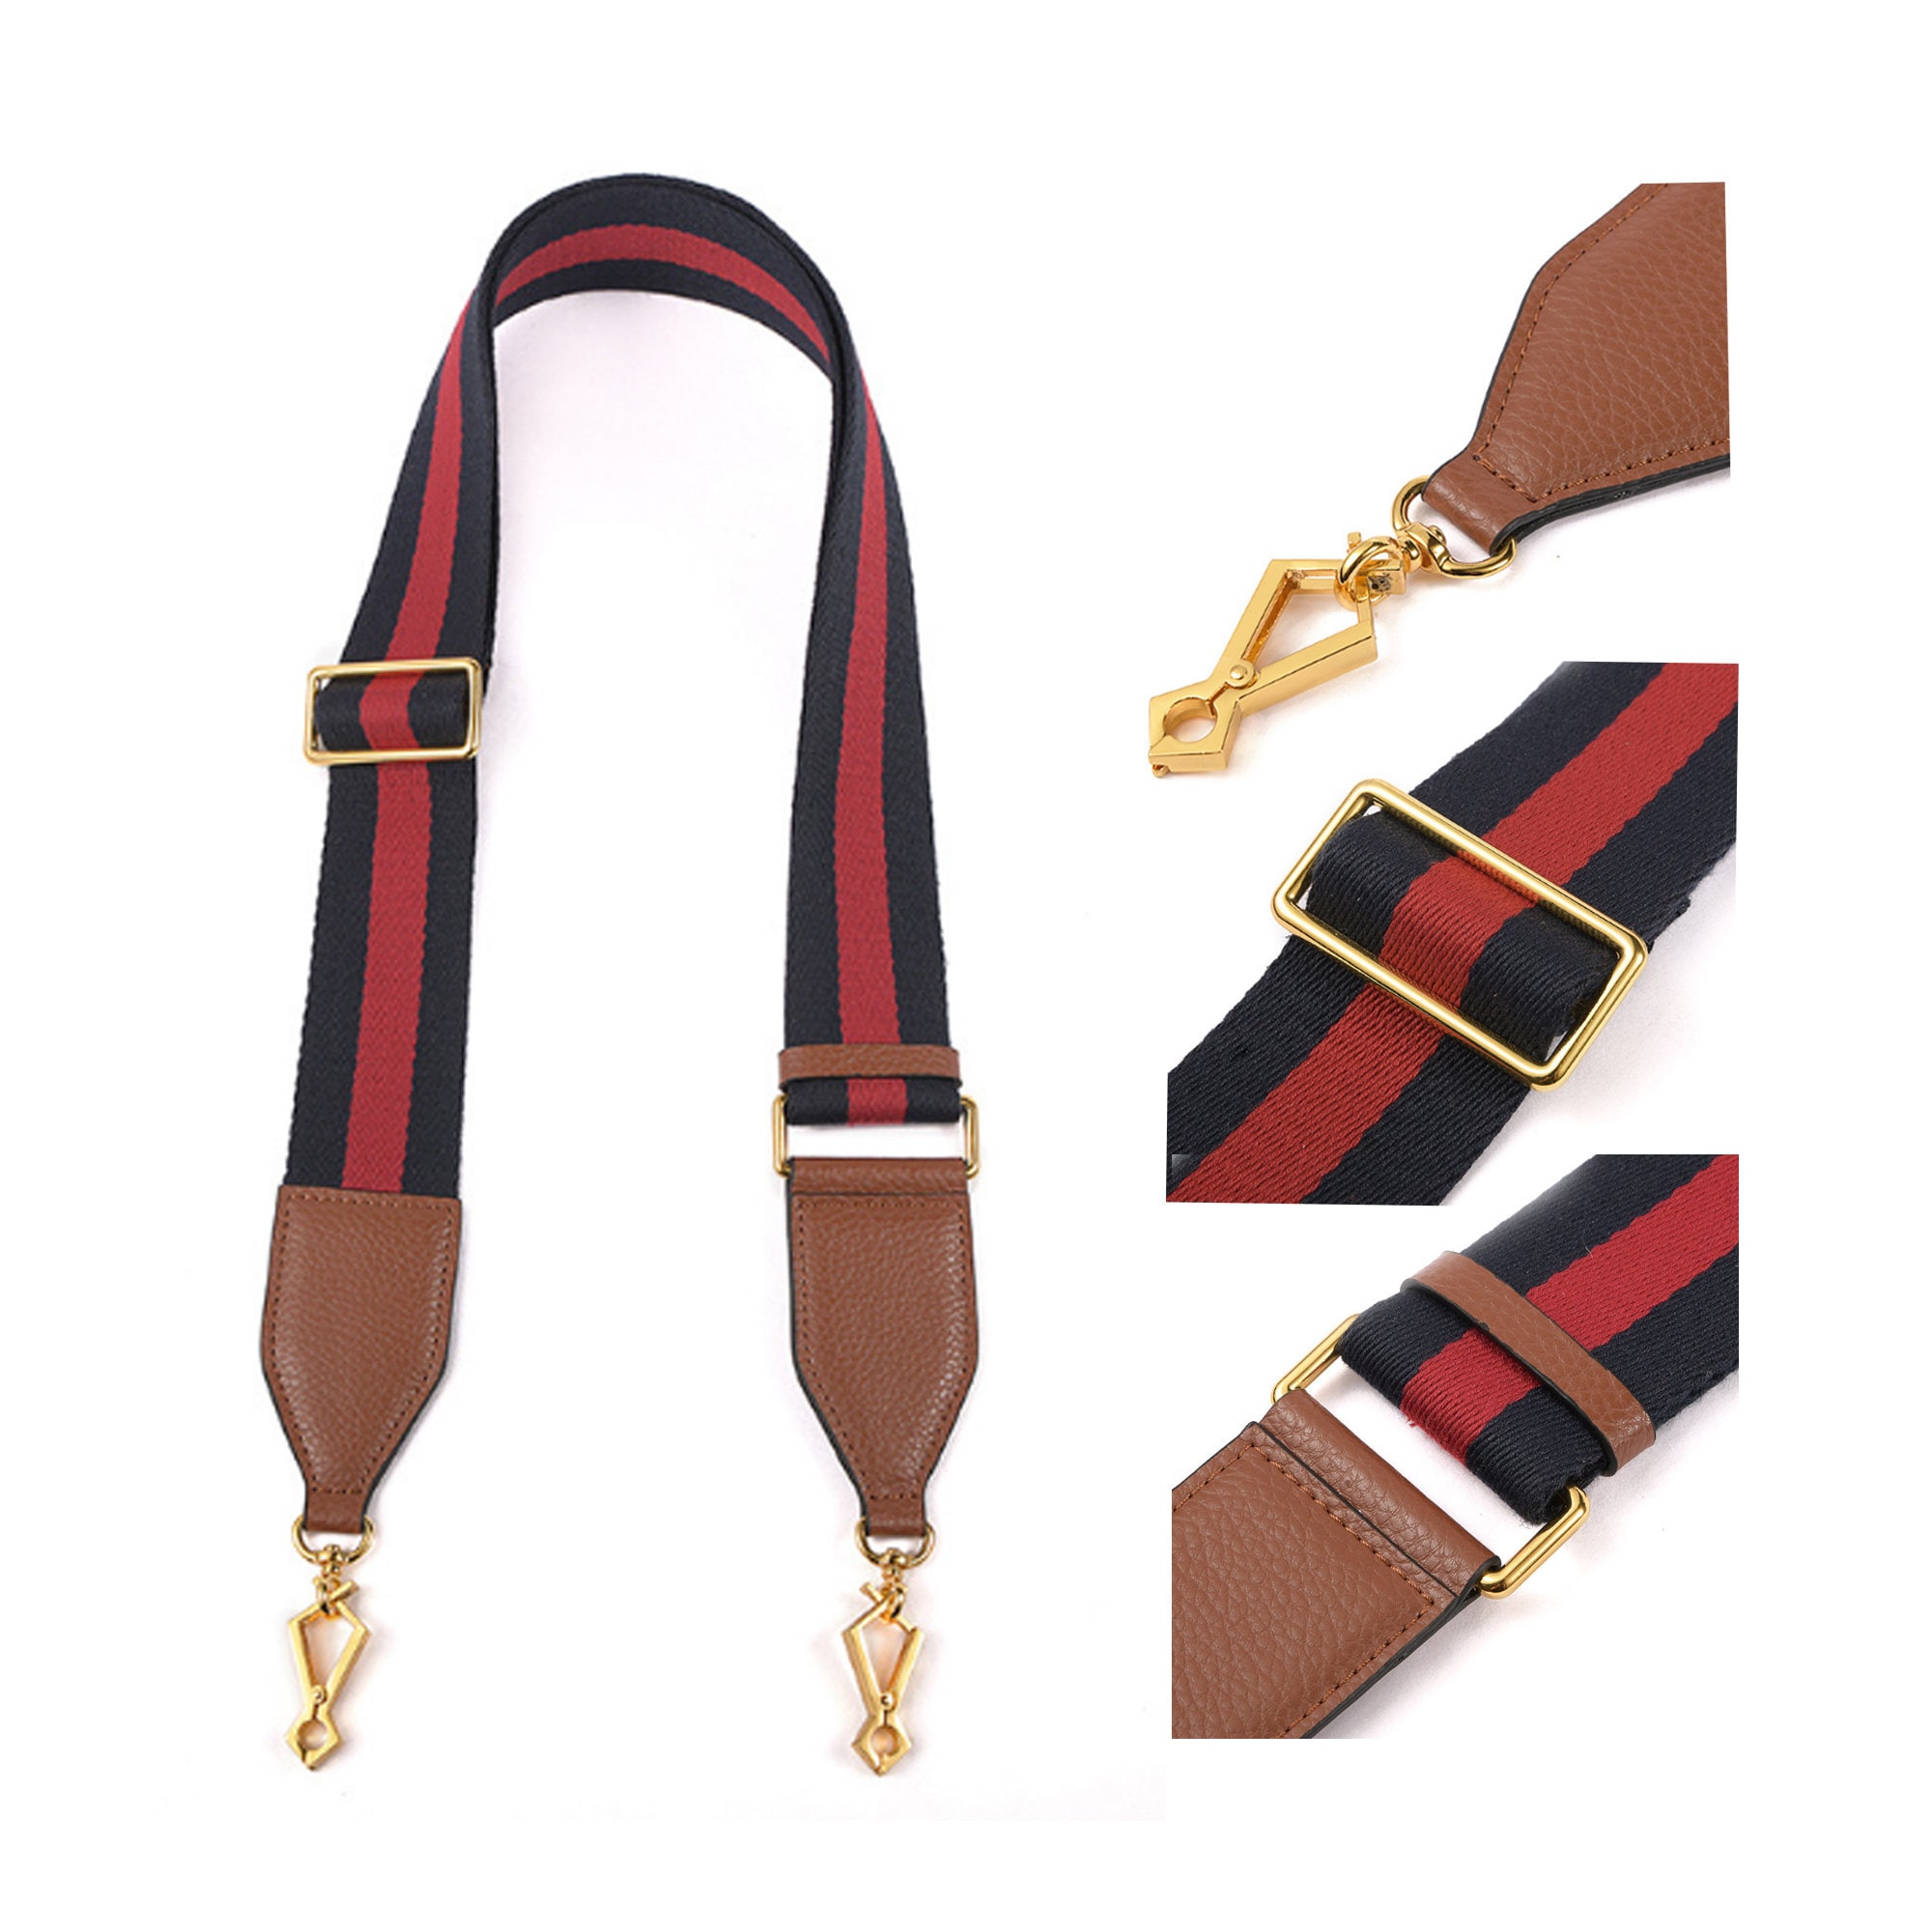 Gucci belt bag strap replace!!🤟, By Revive Shoe Repair